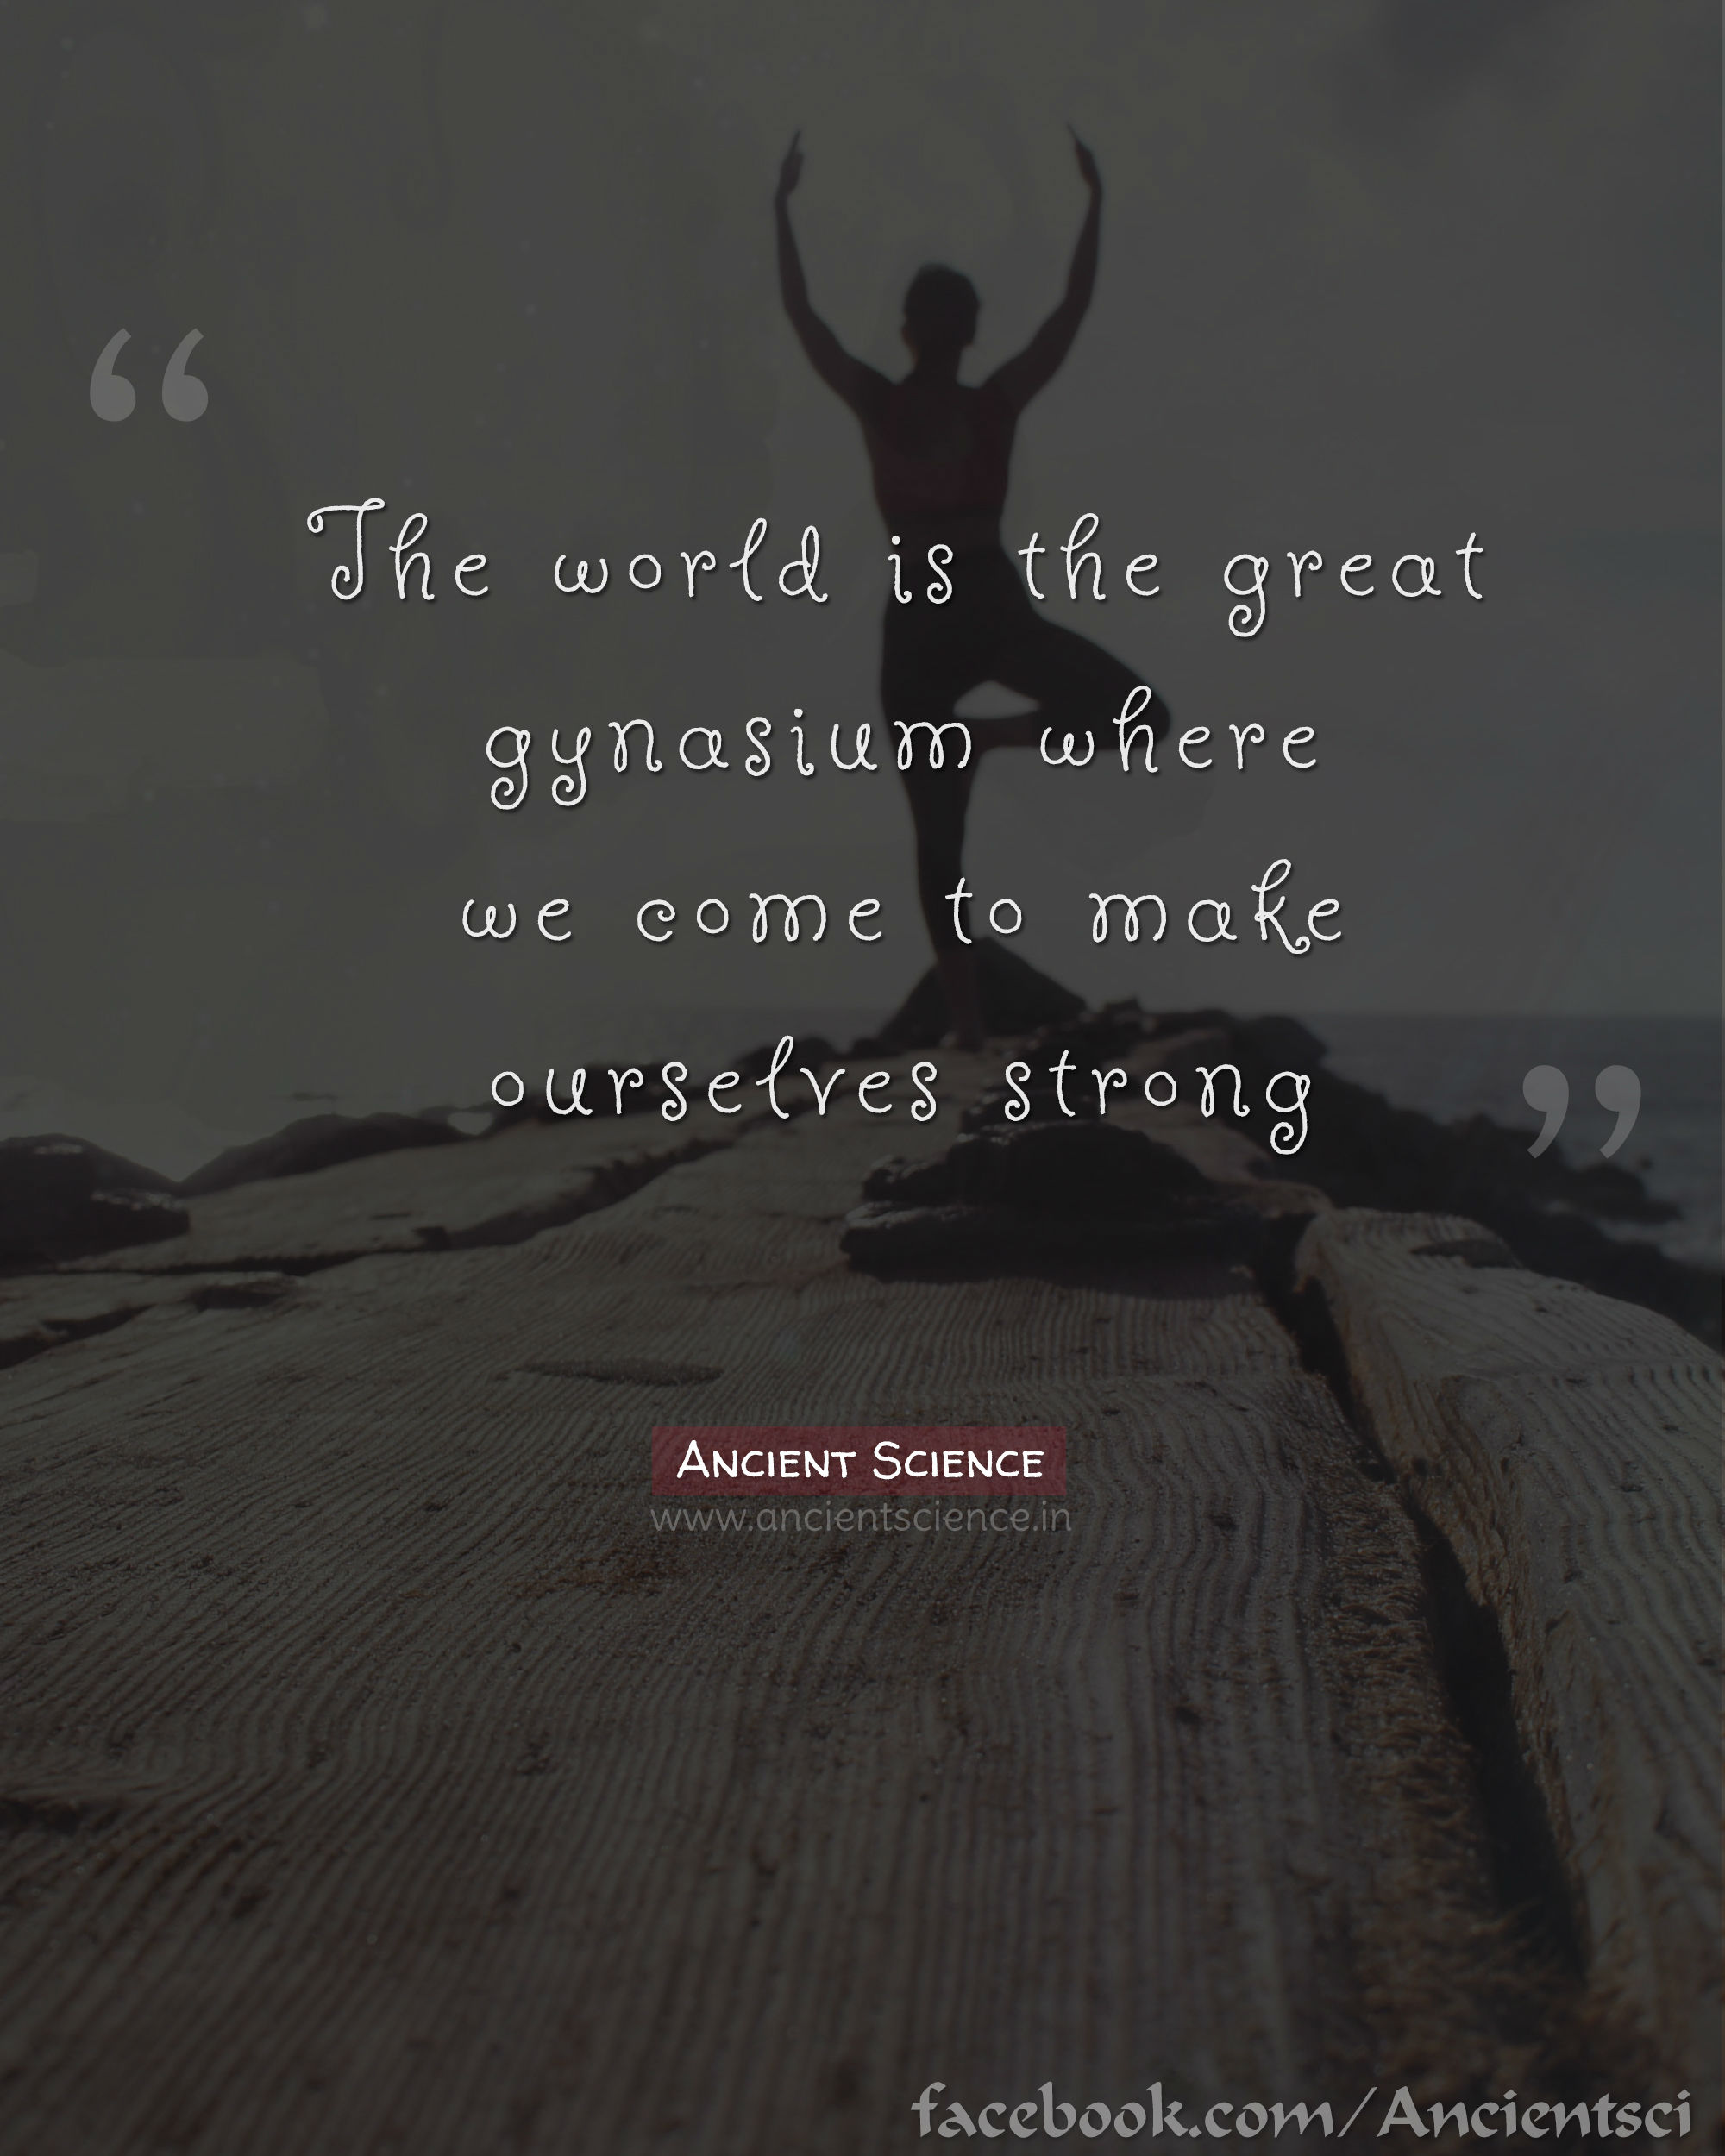 The world is the great gymnasium where we come to make ourselves strong